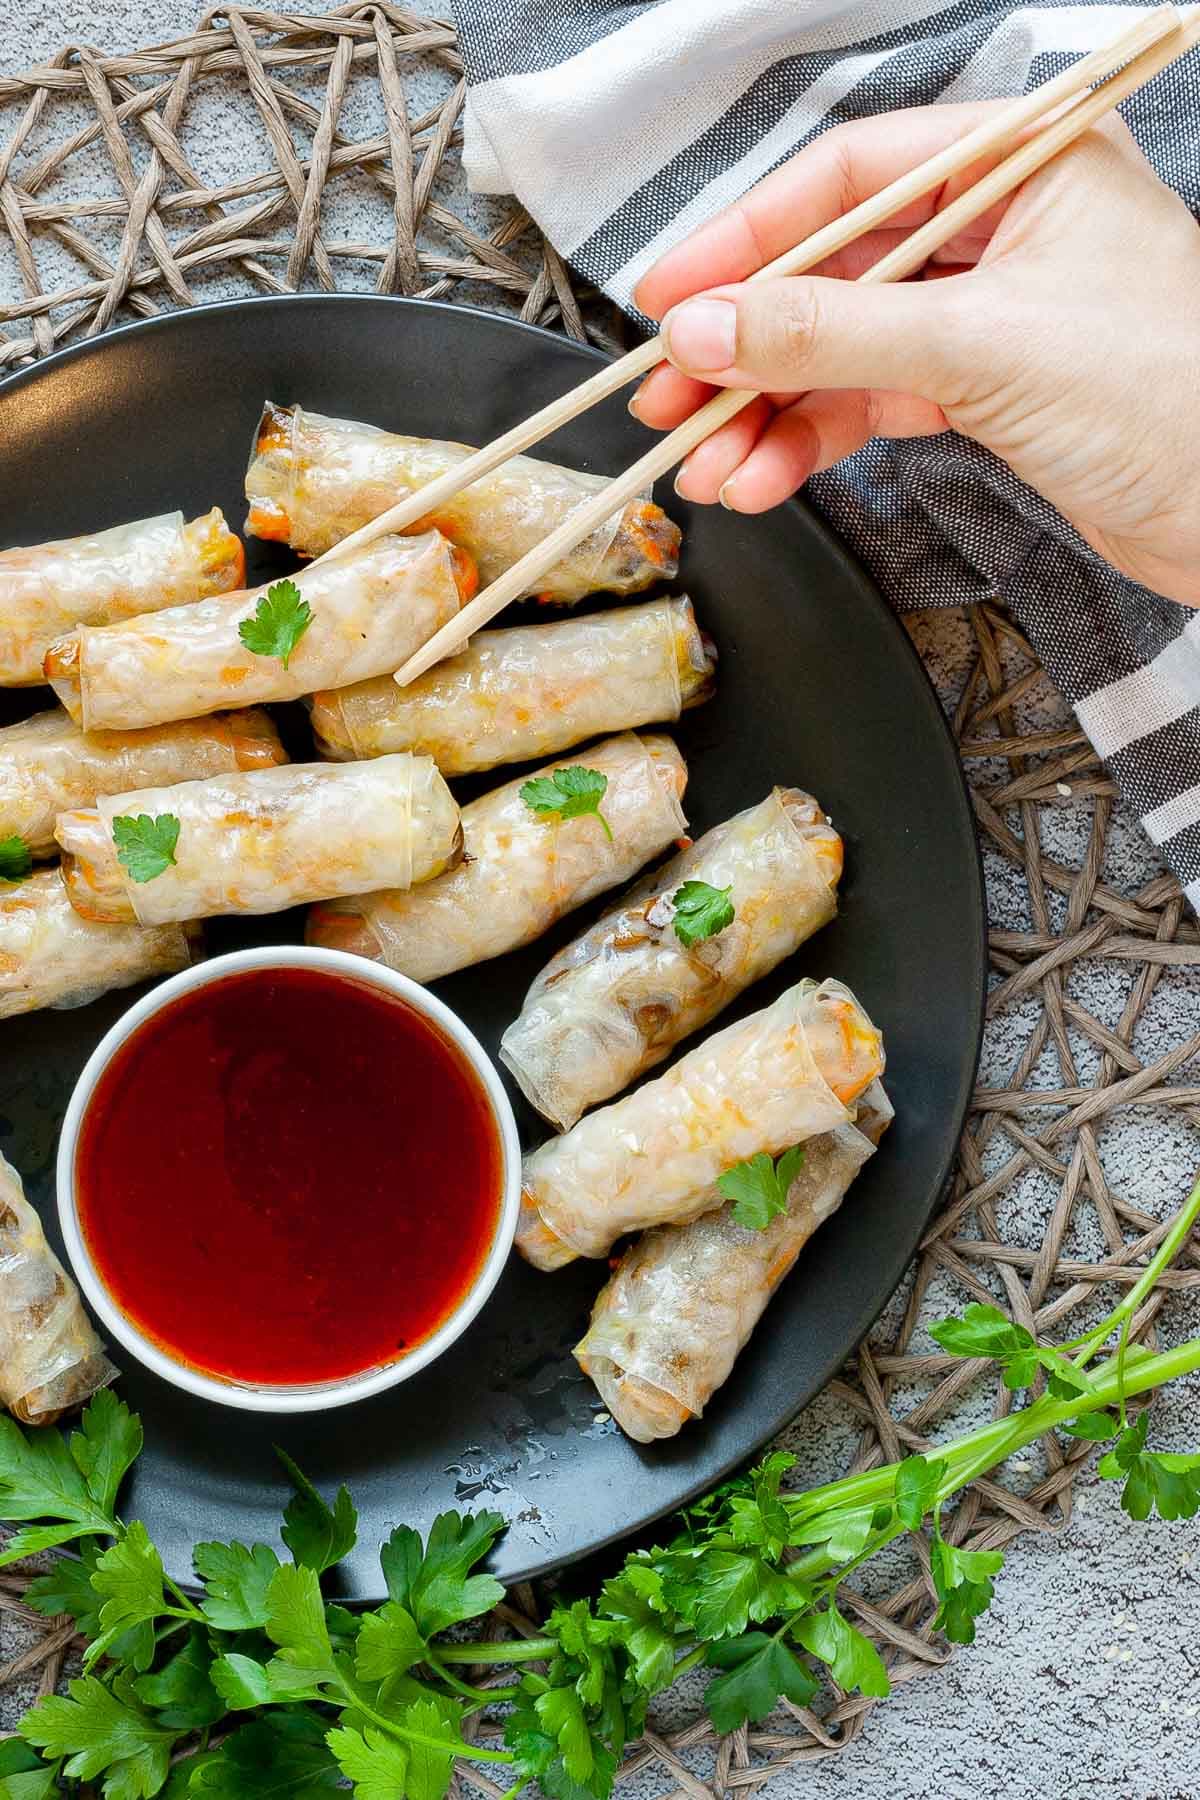 Black plate with crispy looking light brown egg rolls. A small white bowl is with a red dipping sauce. The rolls are sprinkled with parsley leaves.